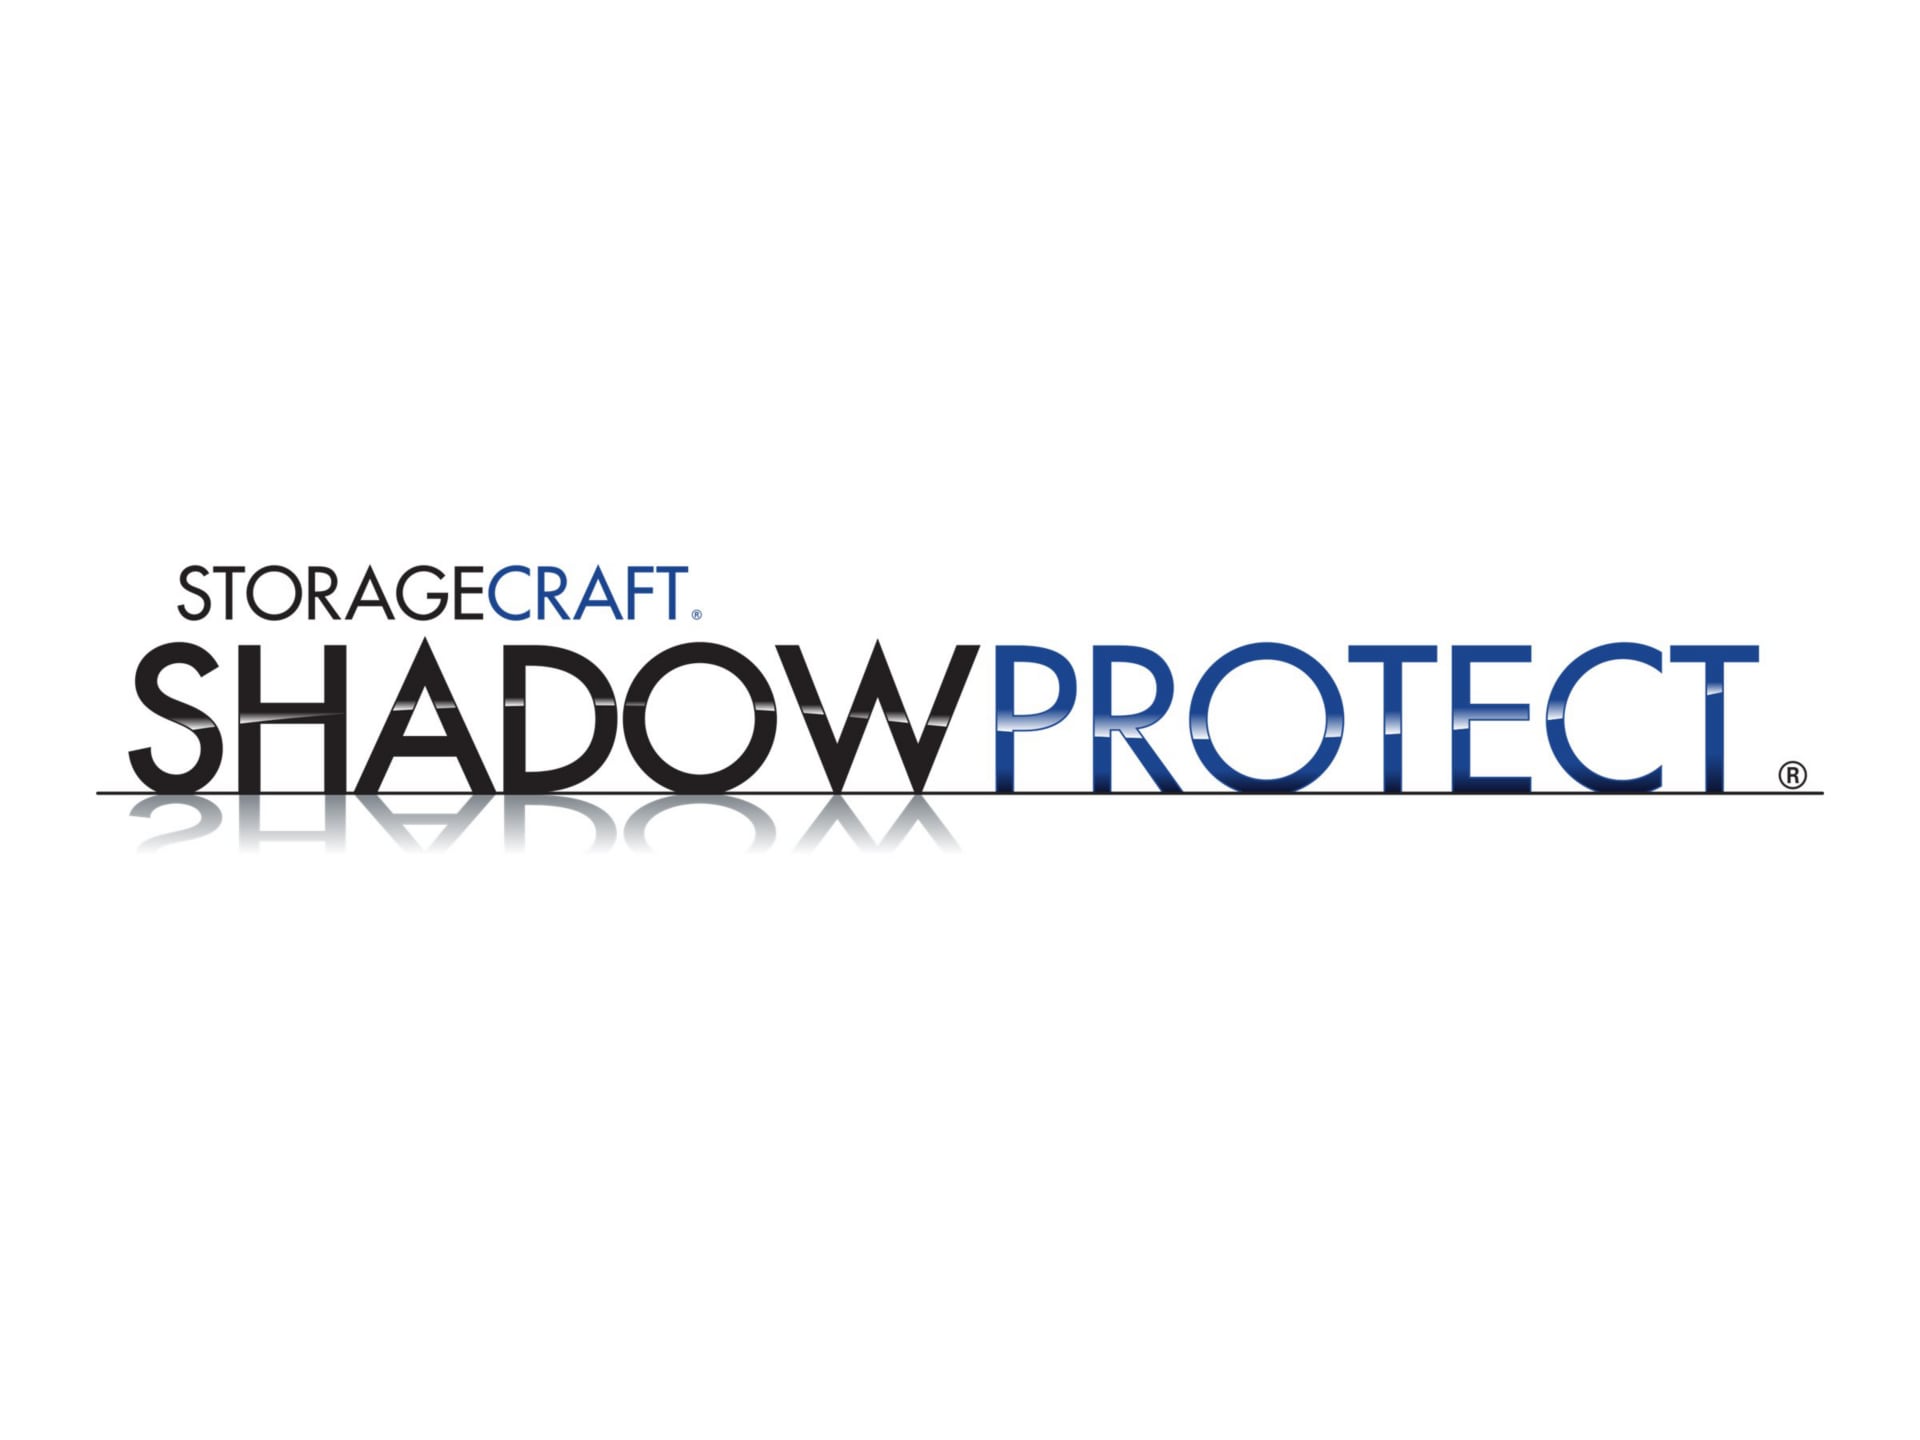 ShadowProtect Granular Recovery for Exchange (v. 8.x) - license + 1 Year Ma